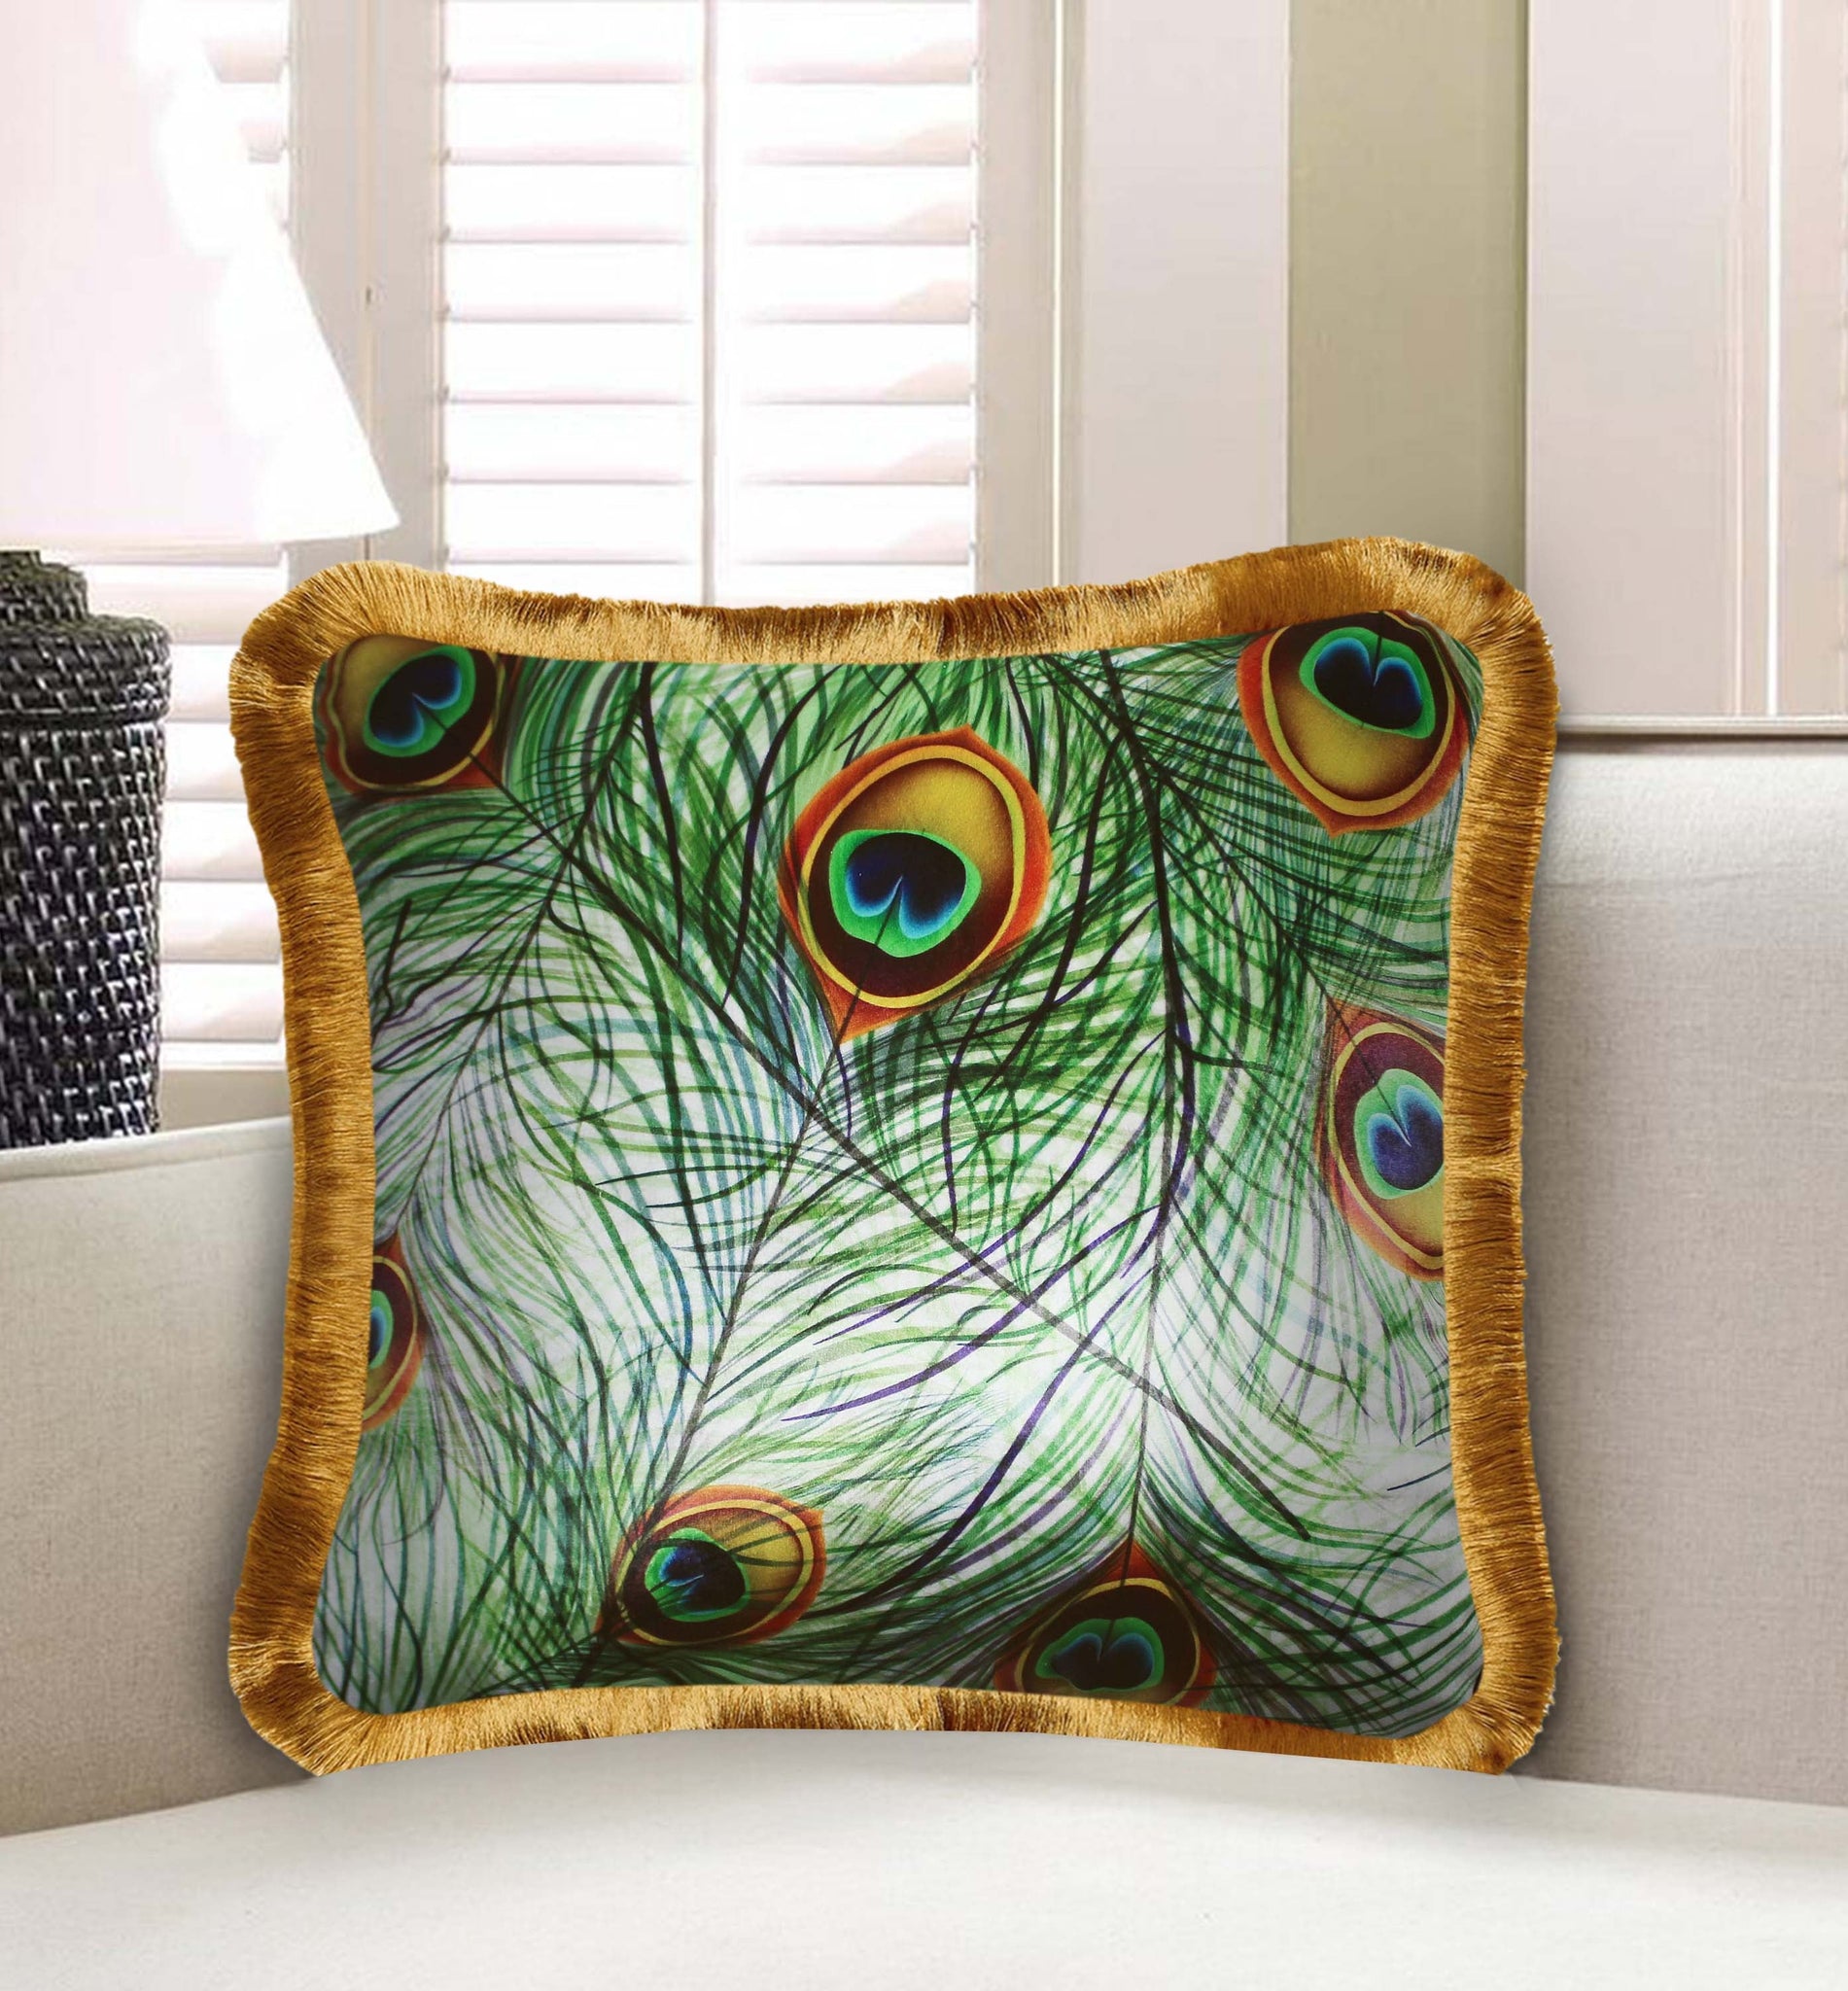 Velvet Cushion Cover Ethnic Peacock Feather Decorative pillowcase Exotic Bird Feather Throw Pillow for Sofa Chair Multi Color 45x45cm 18x18 Inches